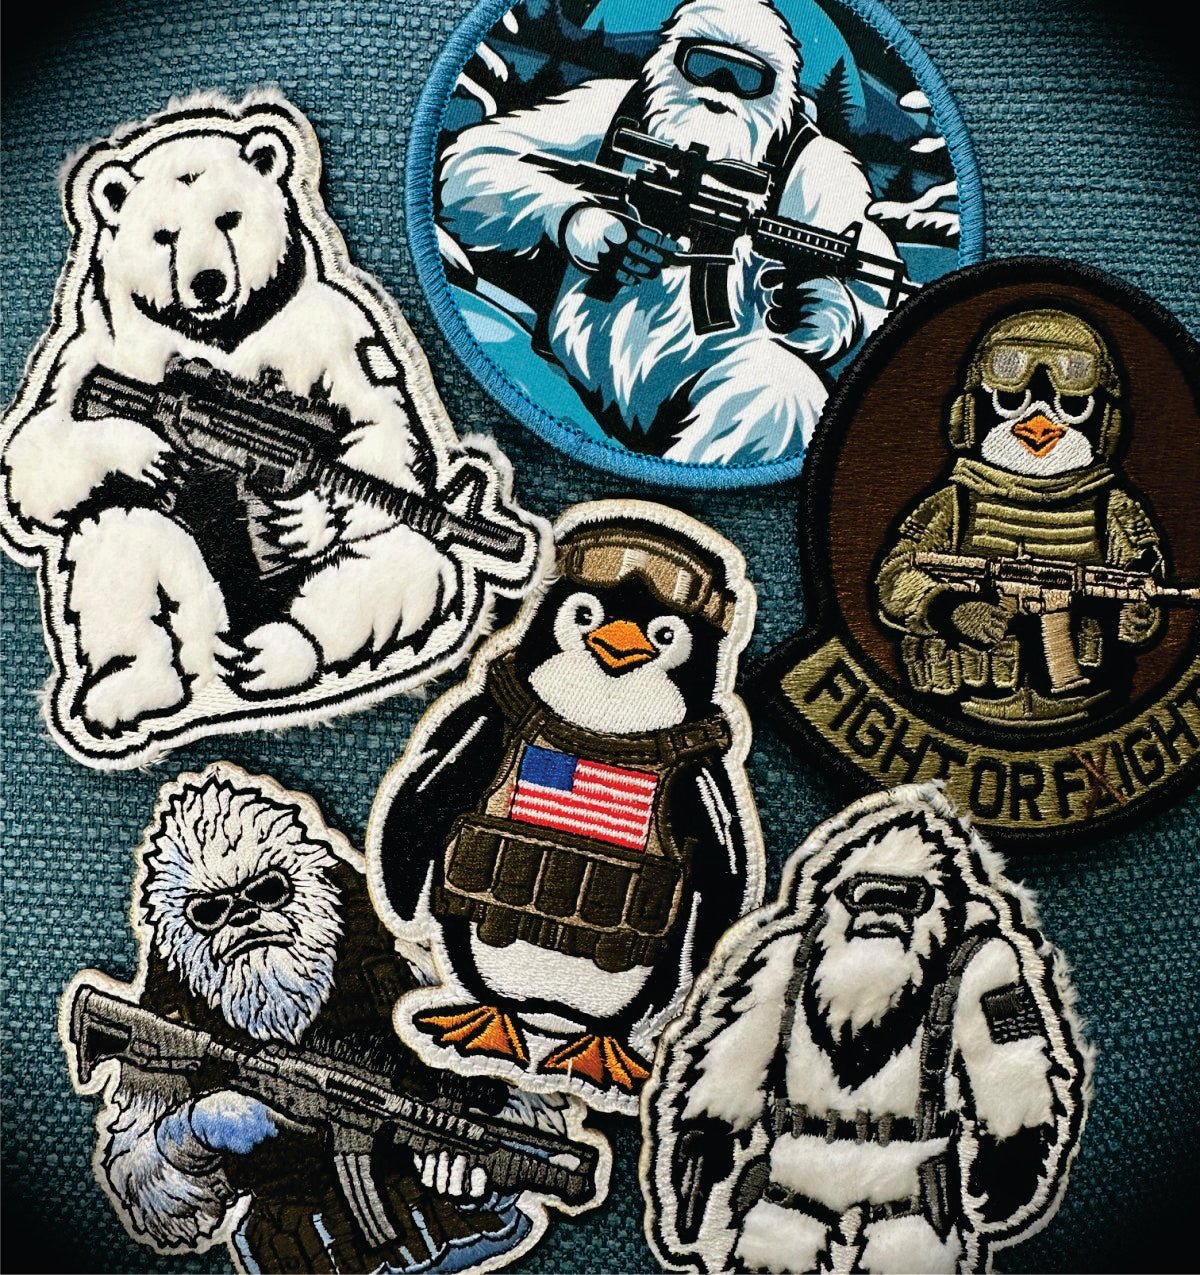 Winter Collection Patch Bundle Pack - Get all Six of our amazing Winter Collection designs! BONUS FREE STICKER SET